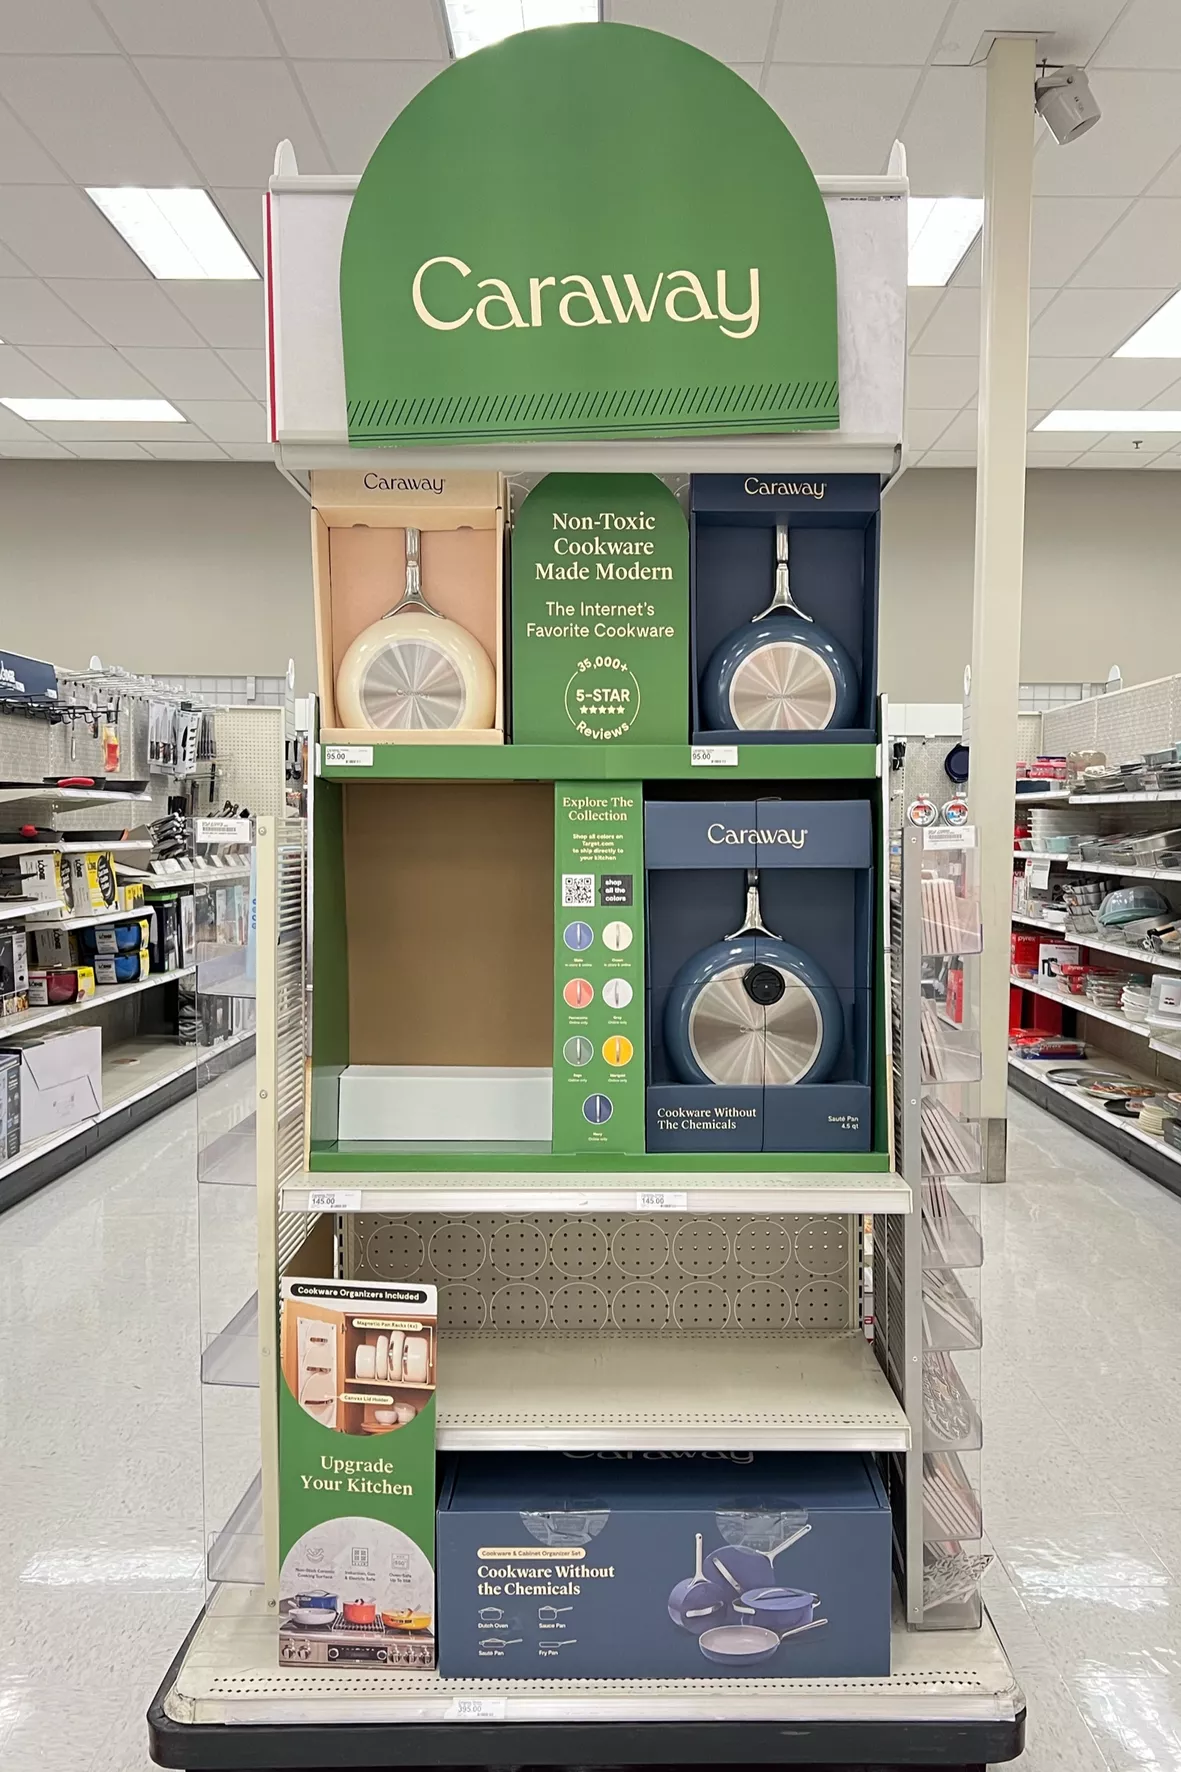 Target to sell Caraway cookware in stores